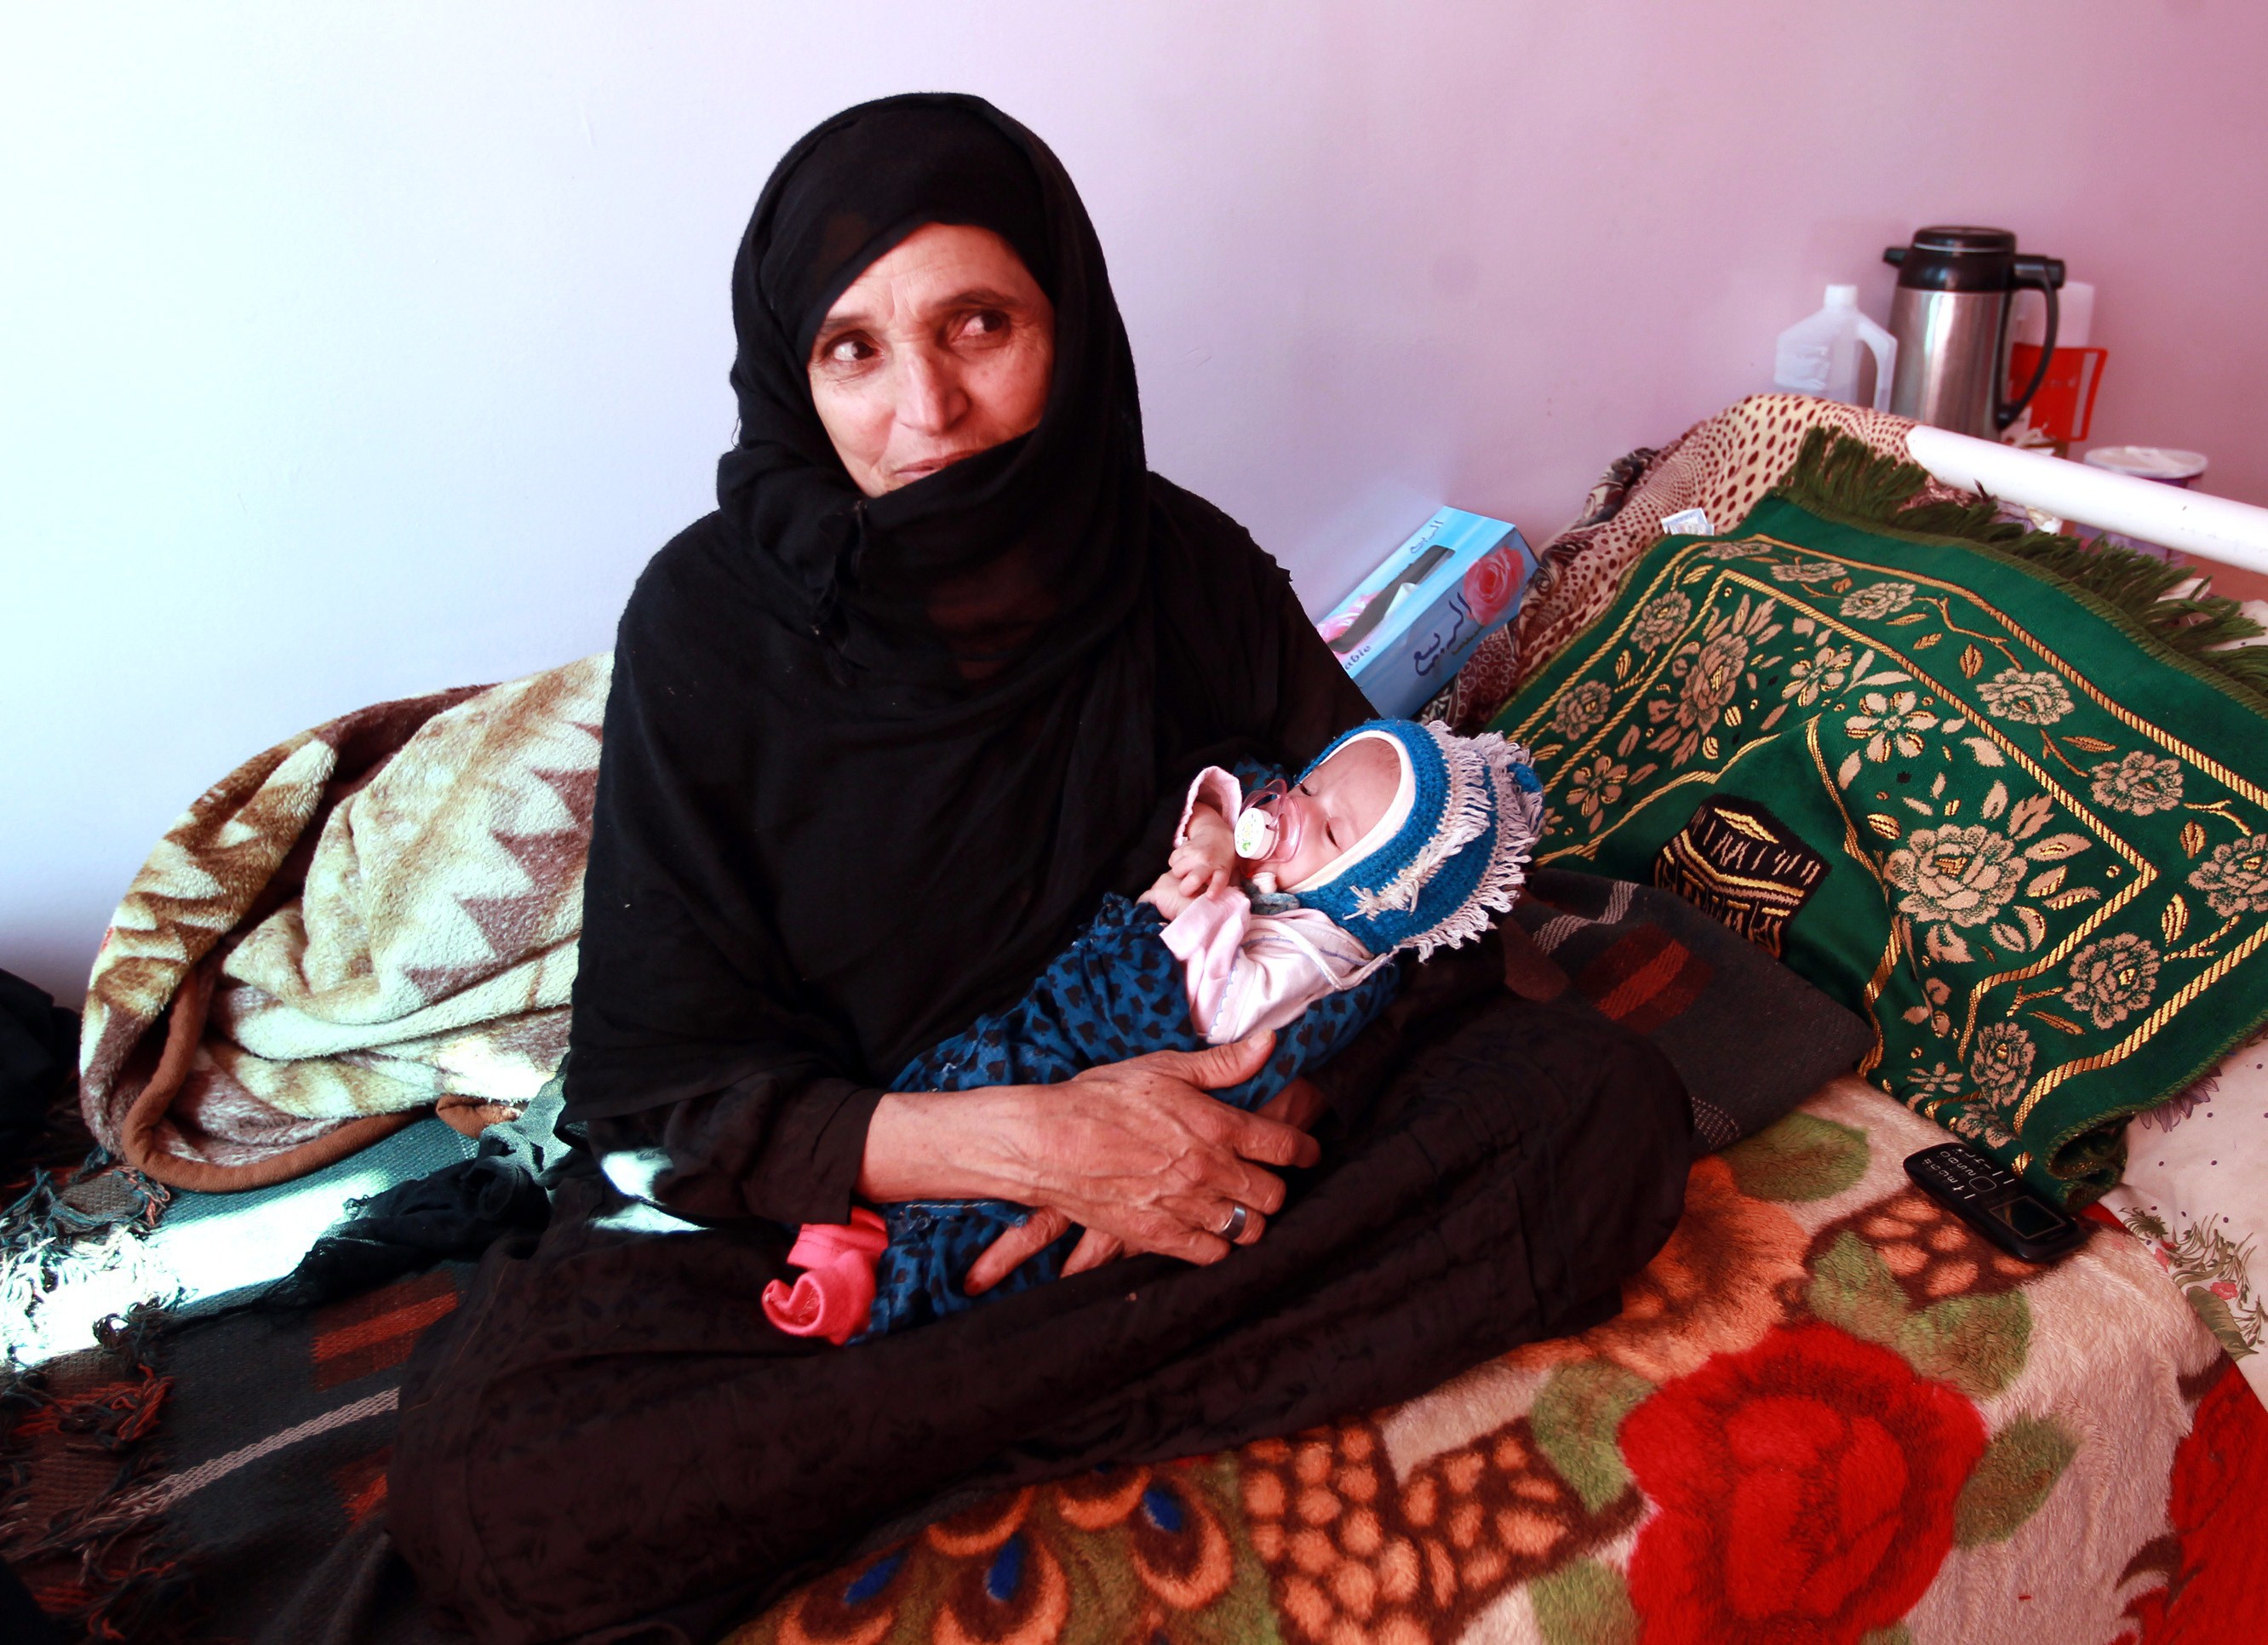 A Yemeni mother holds her malnourished infant at a therapeutic feeding centre in the capital Sanaa on December 9, 2014. Over one million Yemeni girls and boys under 5 suffer from acute malnutrition, including 279,000 who suffer from severe acute malnutrition (SAM), in a situation exacerbated by political instability, multiple localized conflicts and chronic underdevelopment, according to UNICEF. (MOHAMMED HUWAIS&mdash;AFP/Getty Images)